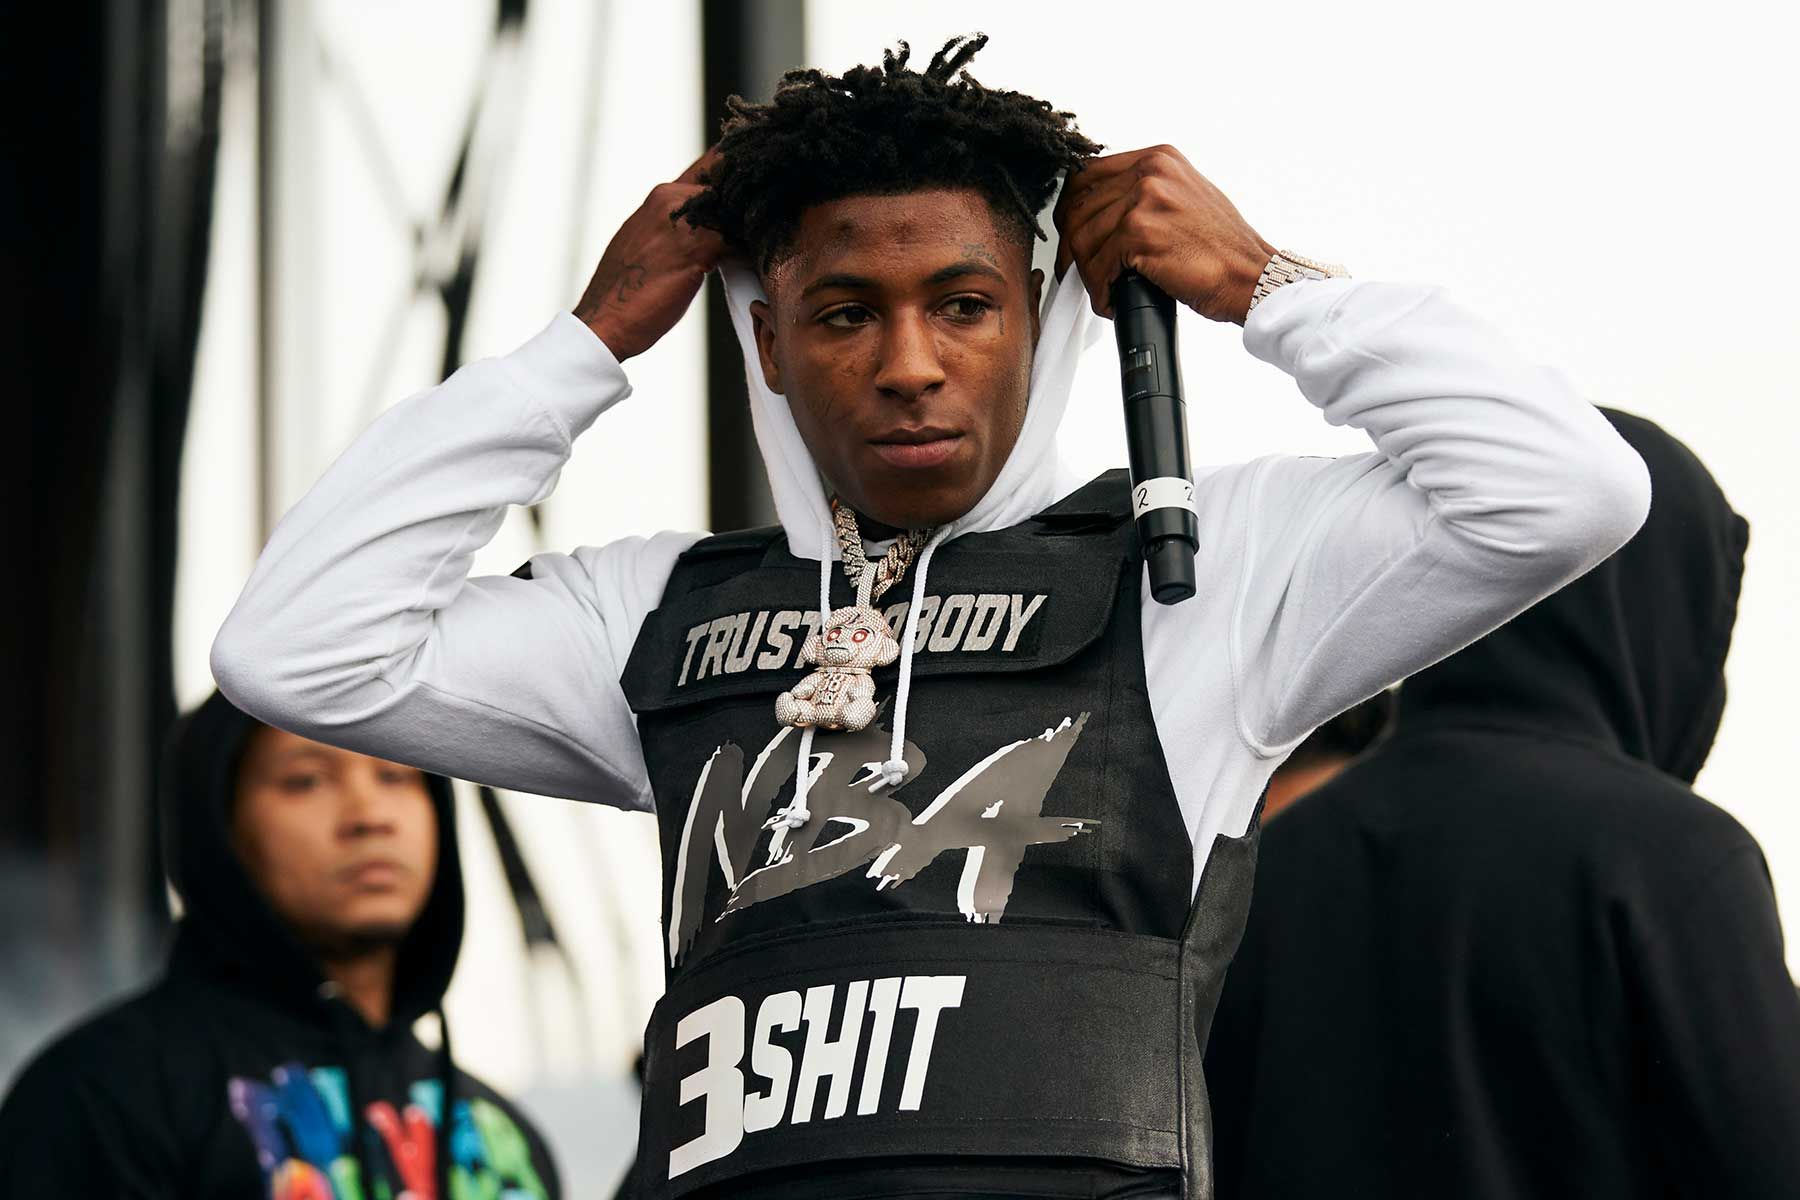 Youngboy never broke again